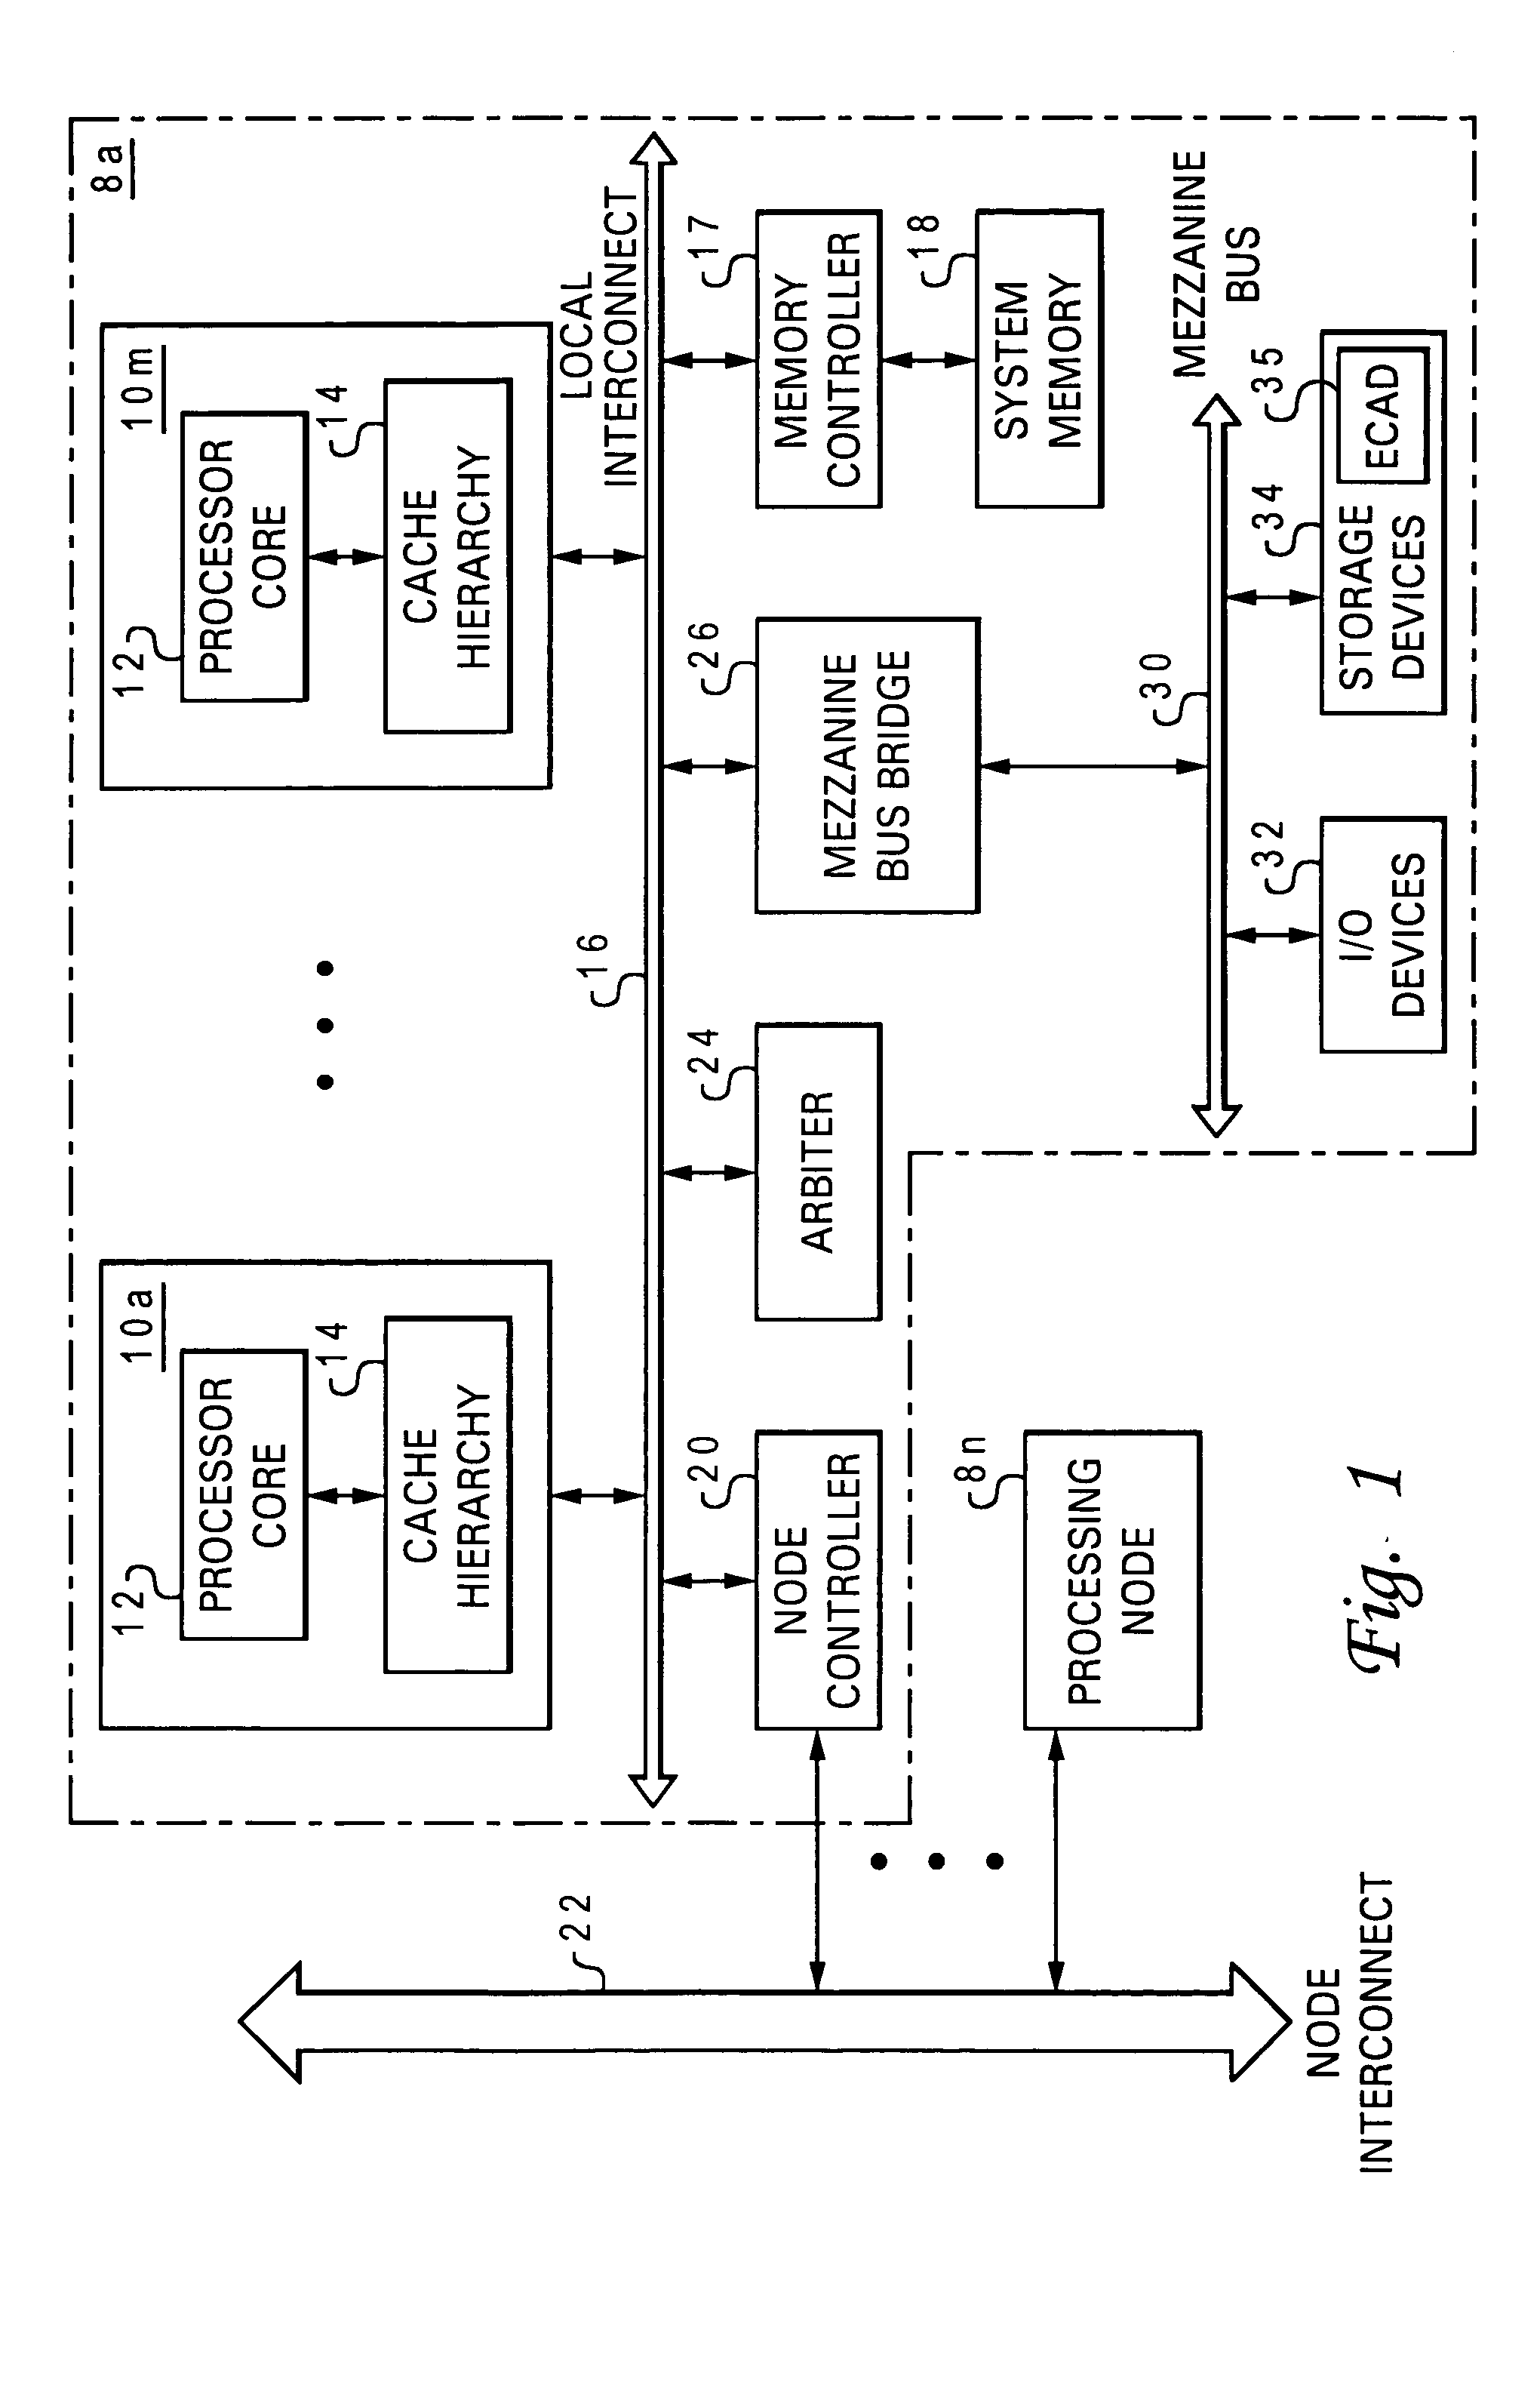 Method, system and program product providing a configuration specification language supporting arbitrary mapping functions for configuration constructs